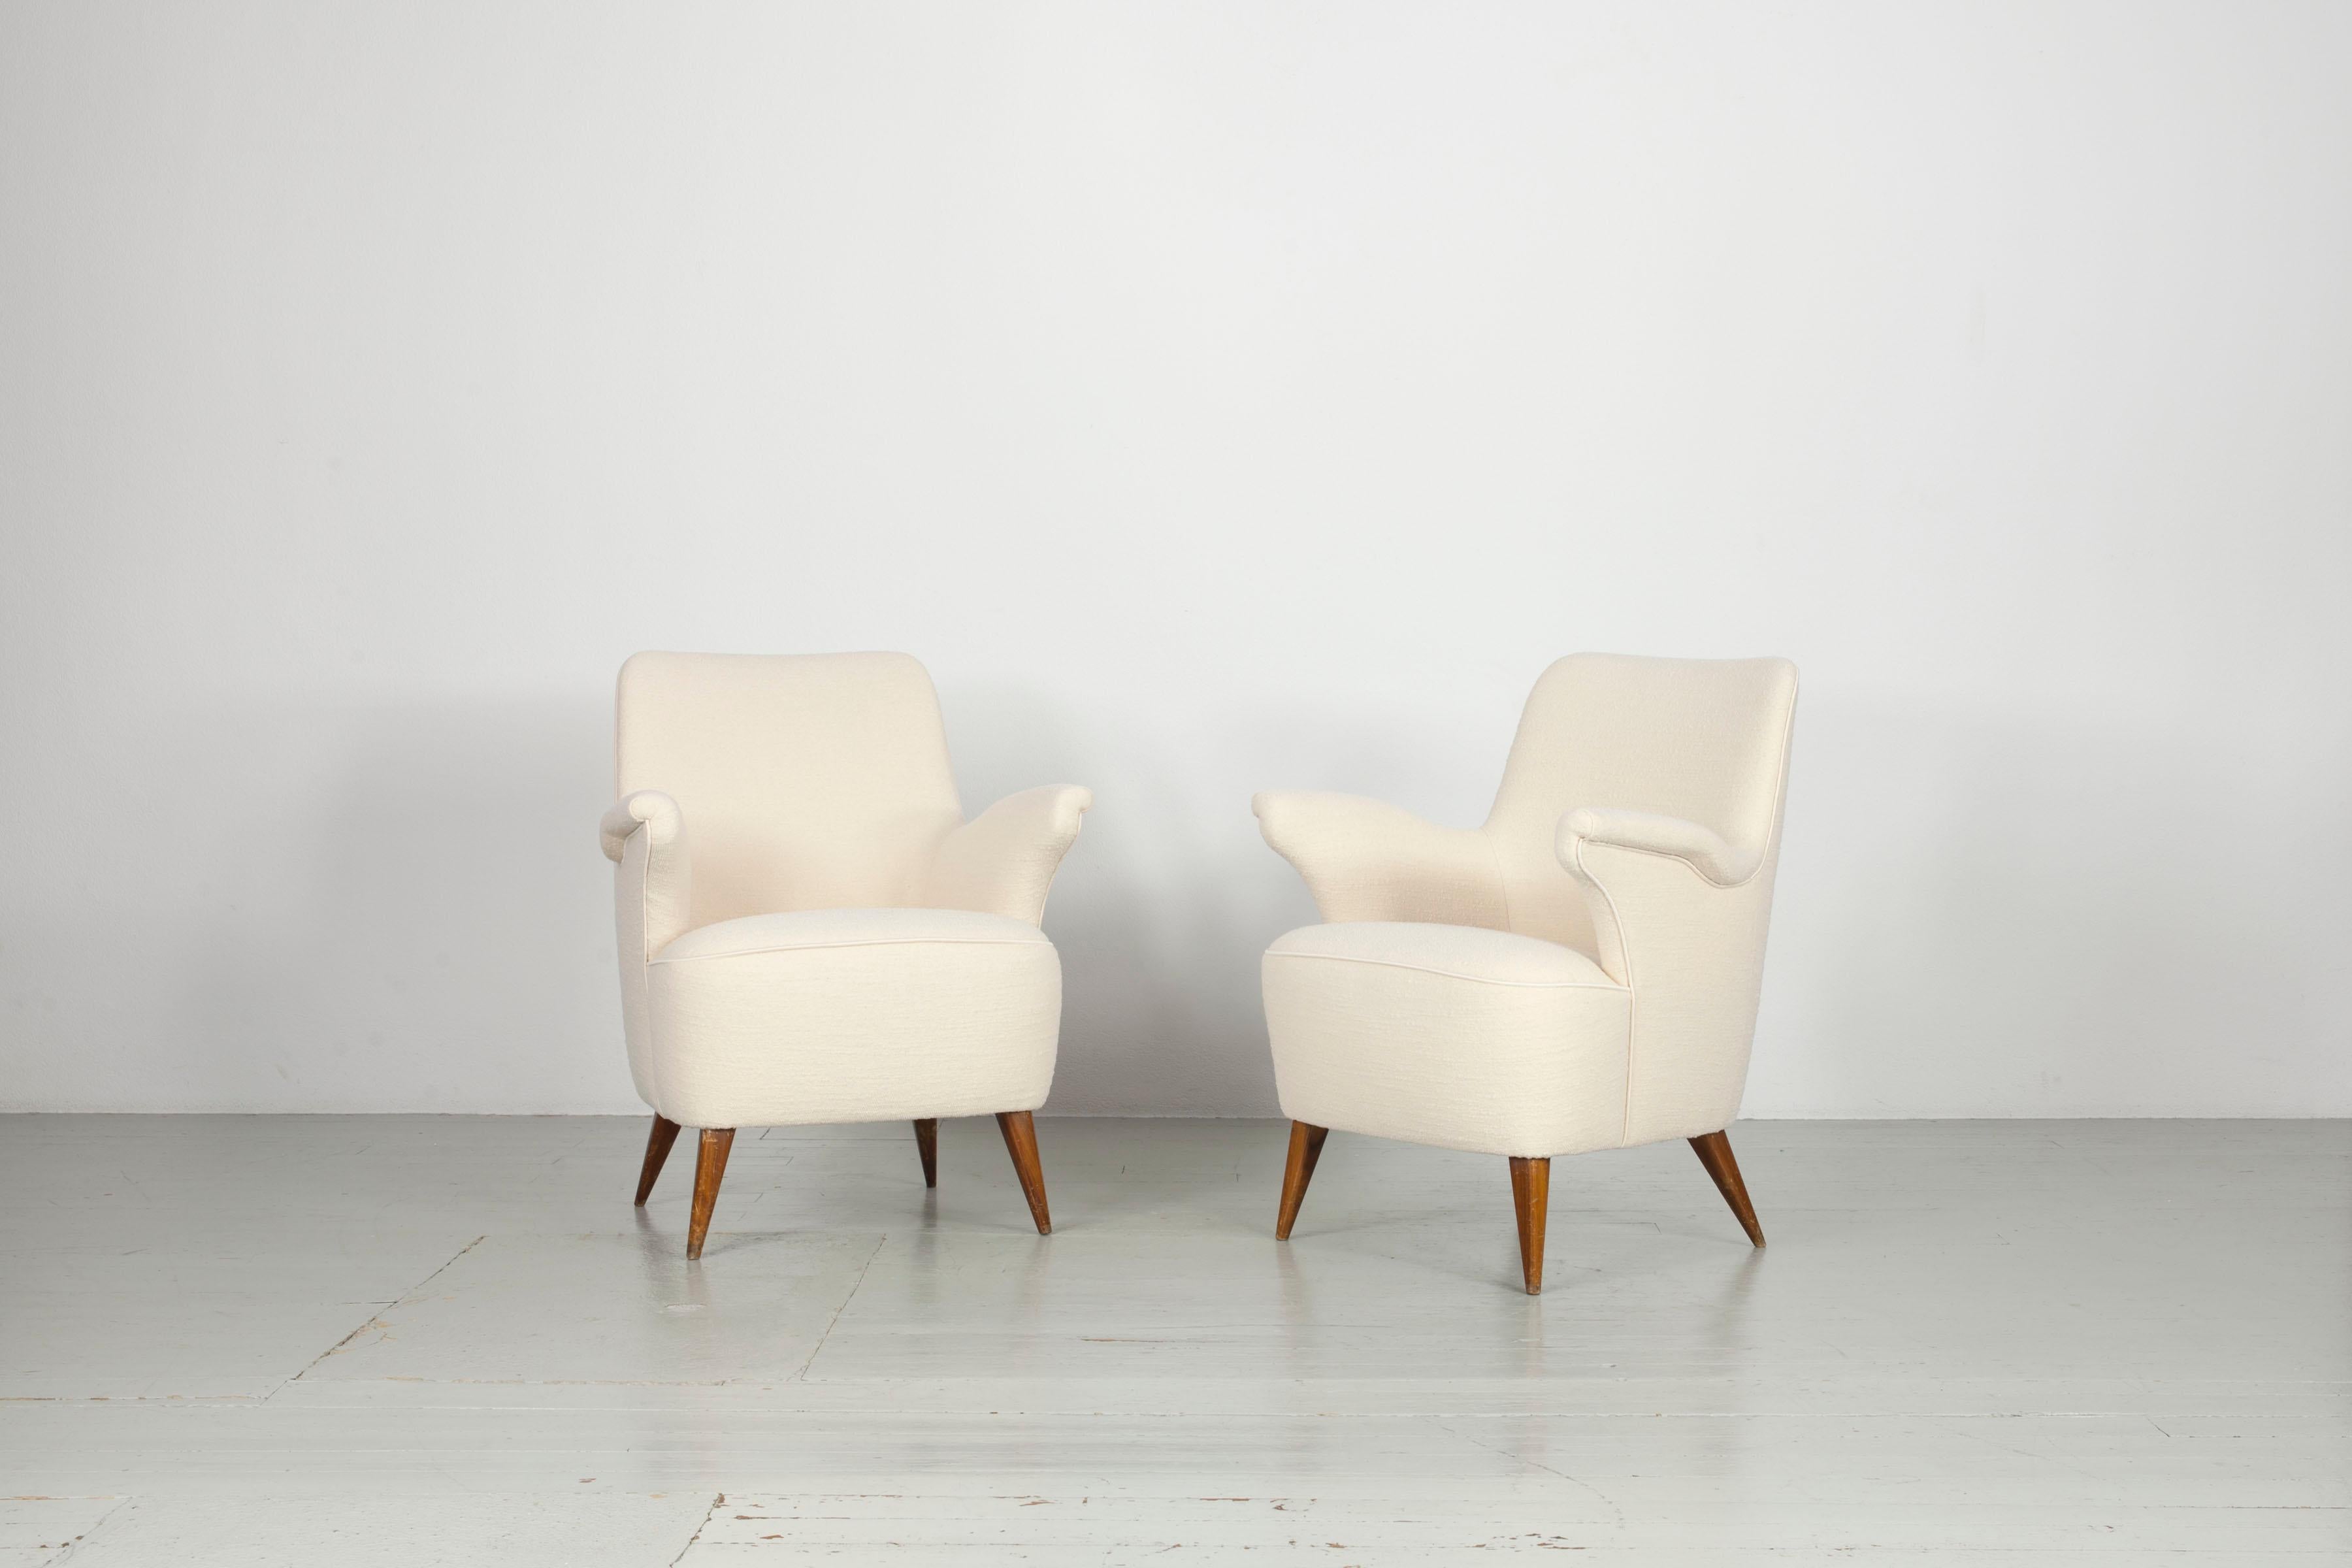 Set of 2 Cream Coloured Italian Marine Armchairs from the 1950s For Sale 1